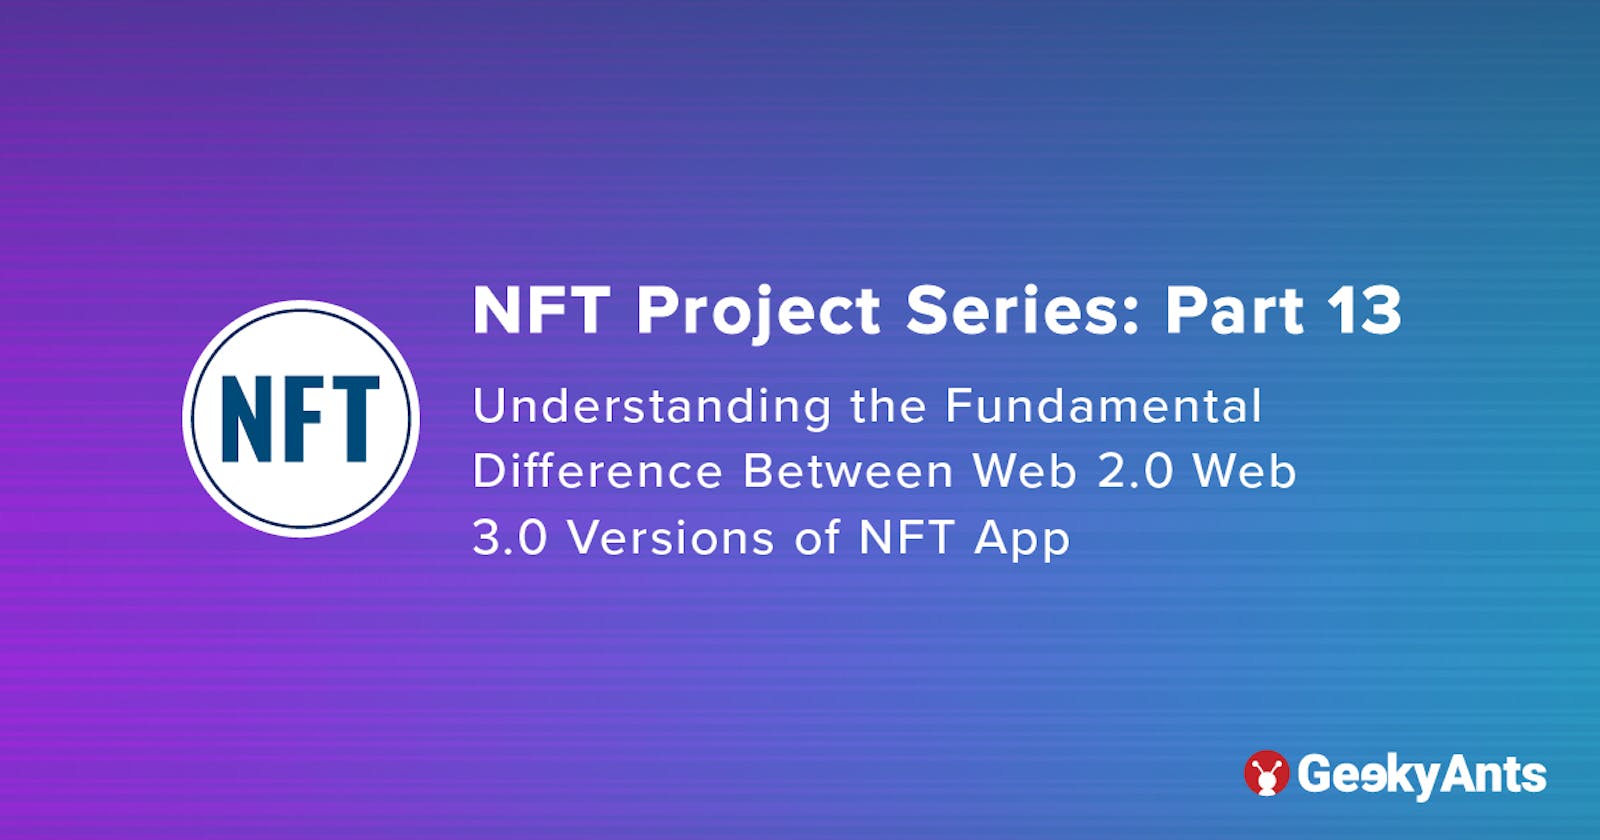 NFT Project Series Part 13: Understanding the Fundamental Difference Between Web 2.0 & Web 3.0 Versions of NFT App